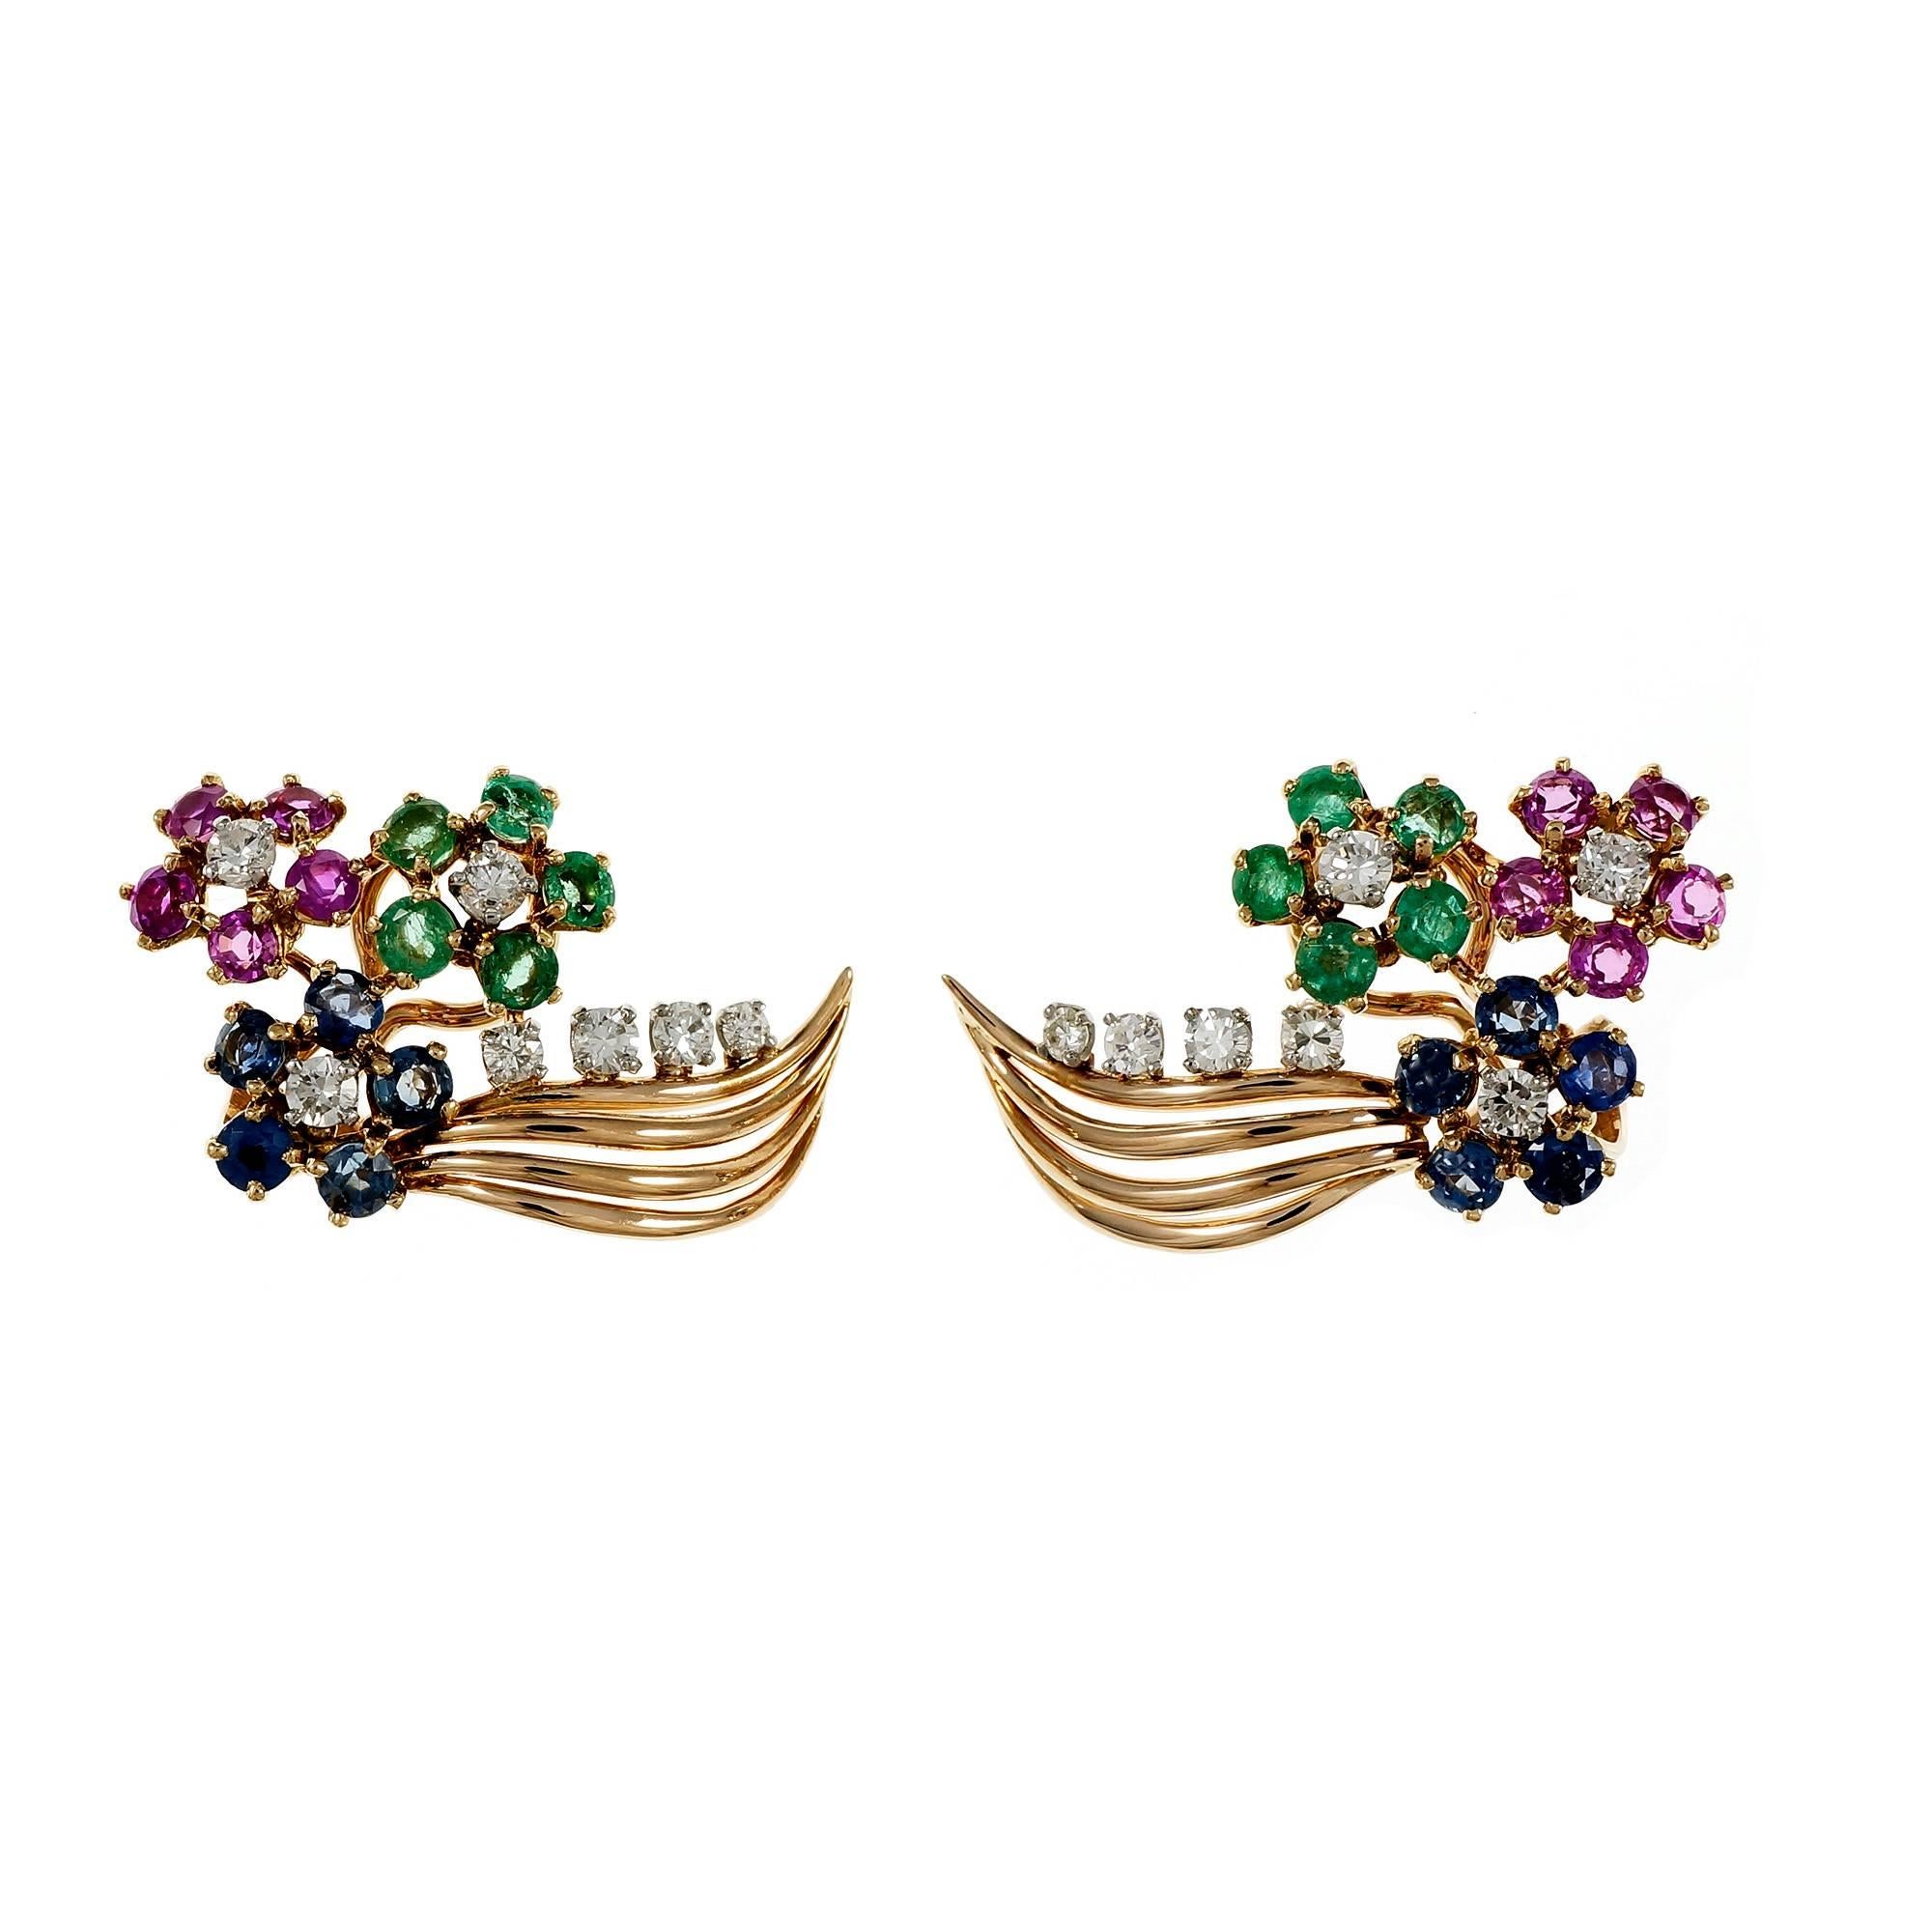 1940-1950 vintage clip post flower design earrings in 14k gold with genuine Emeralds, Rubies, Sapphires and Diamonds.

14 round full cut Diamonds, approx. total weight .60cts, H – I, VS
10 pinkish red genuine Rubies, approx. total weight 1.15cts,